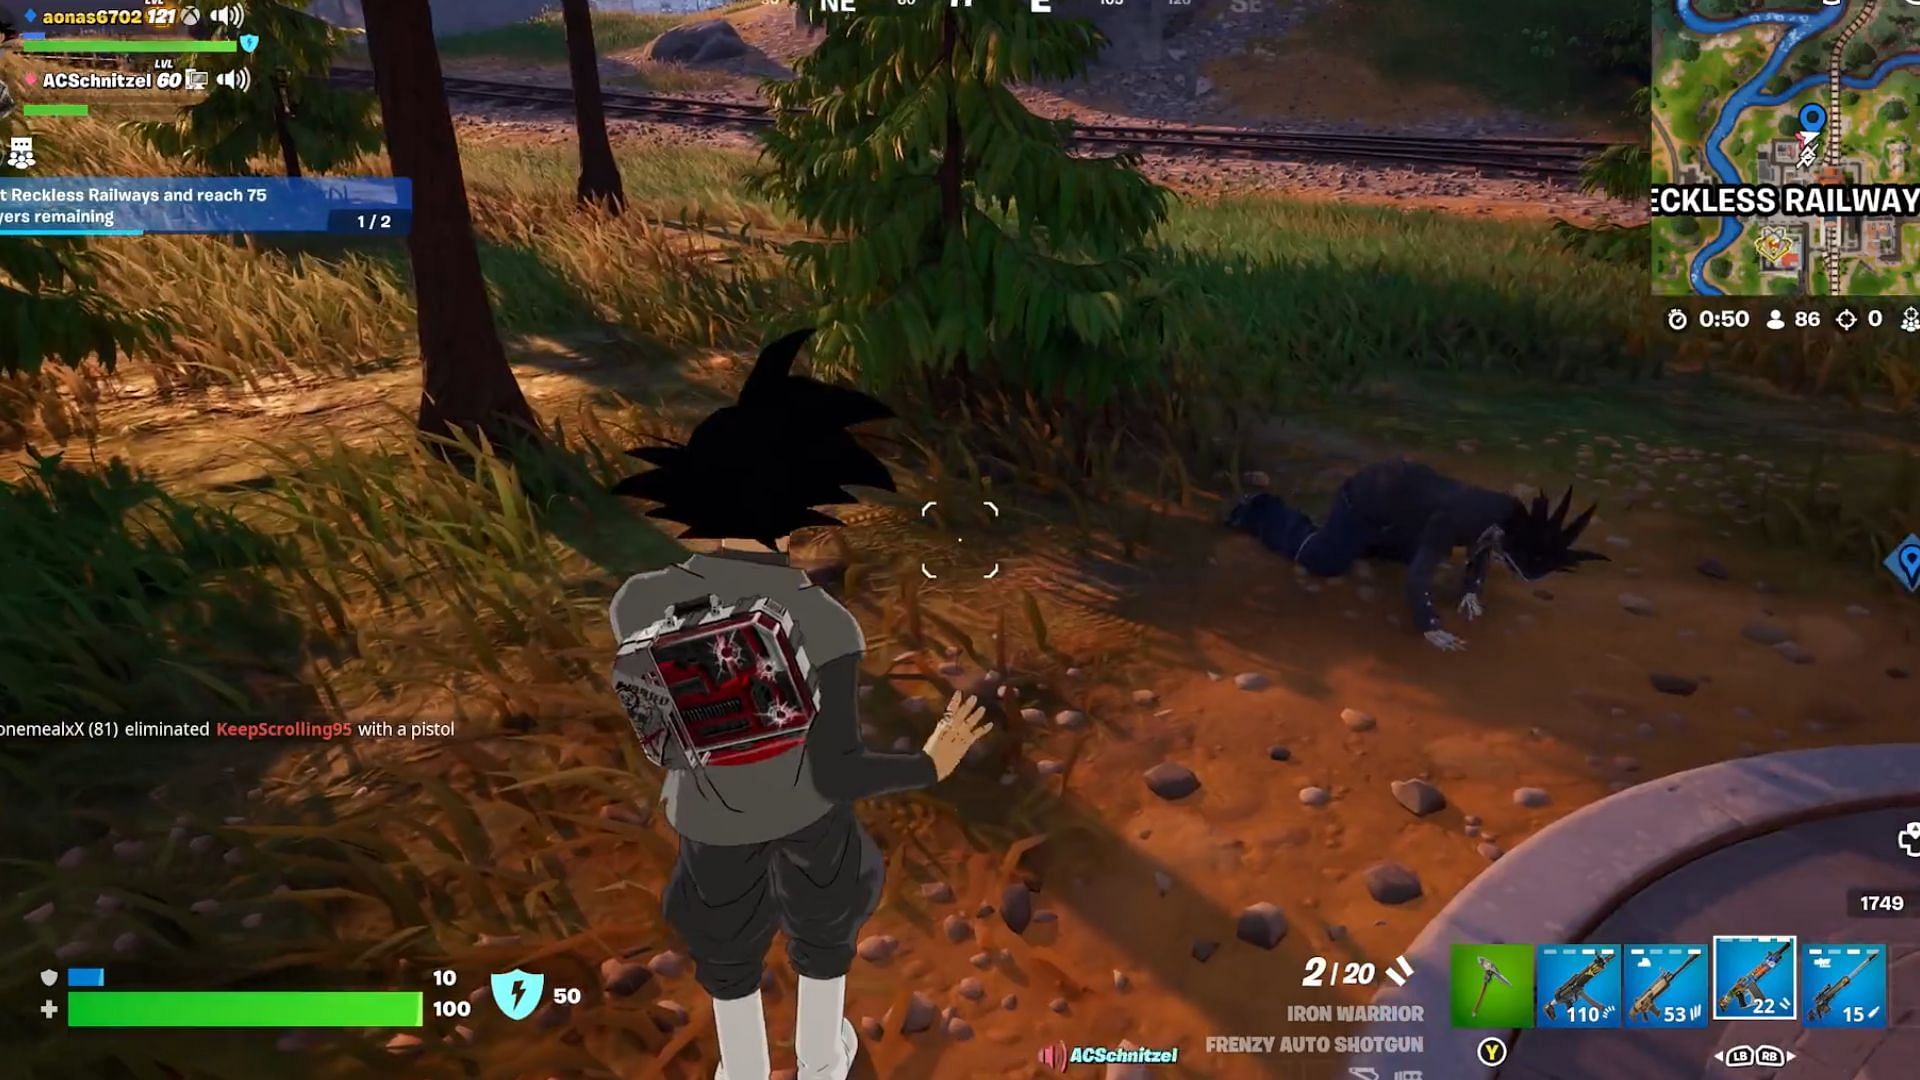 Fortnite player Emotes at downed opponent, immediately regrets their decision